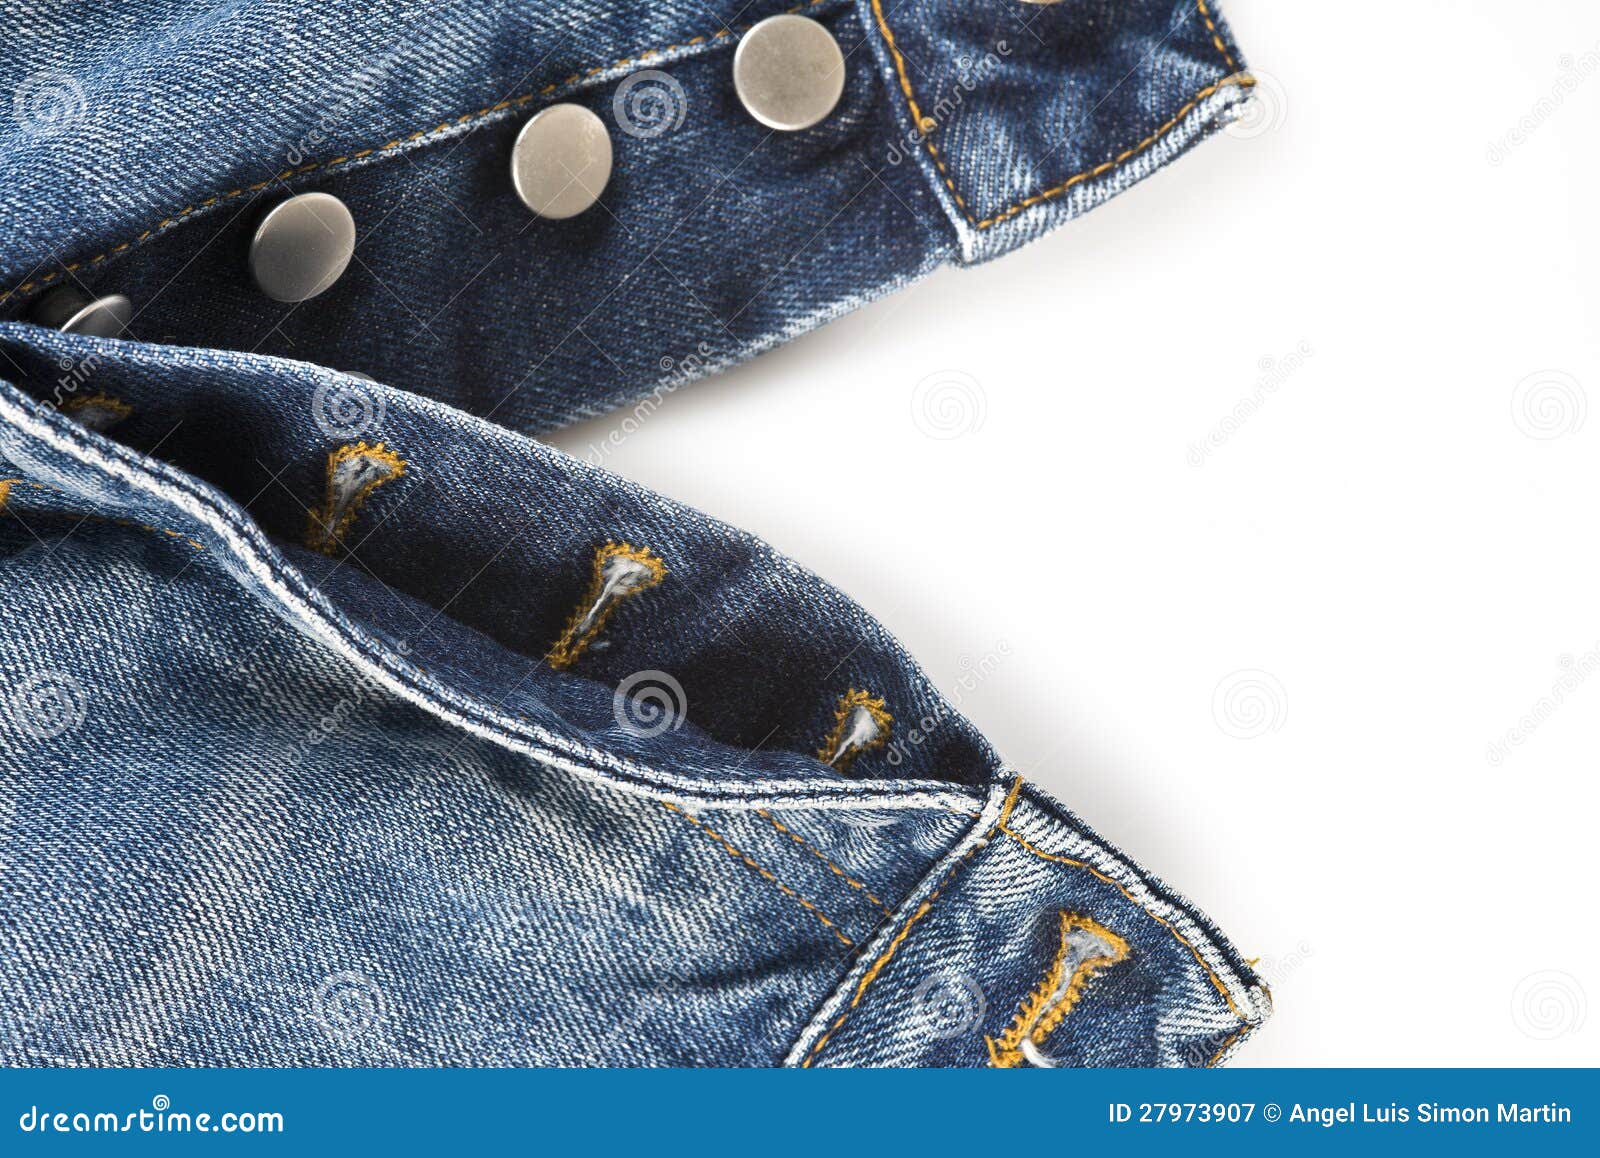 fly of the jeans with button closure